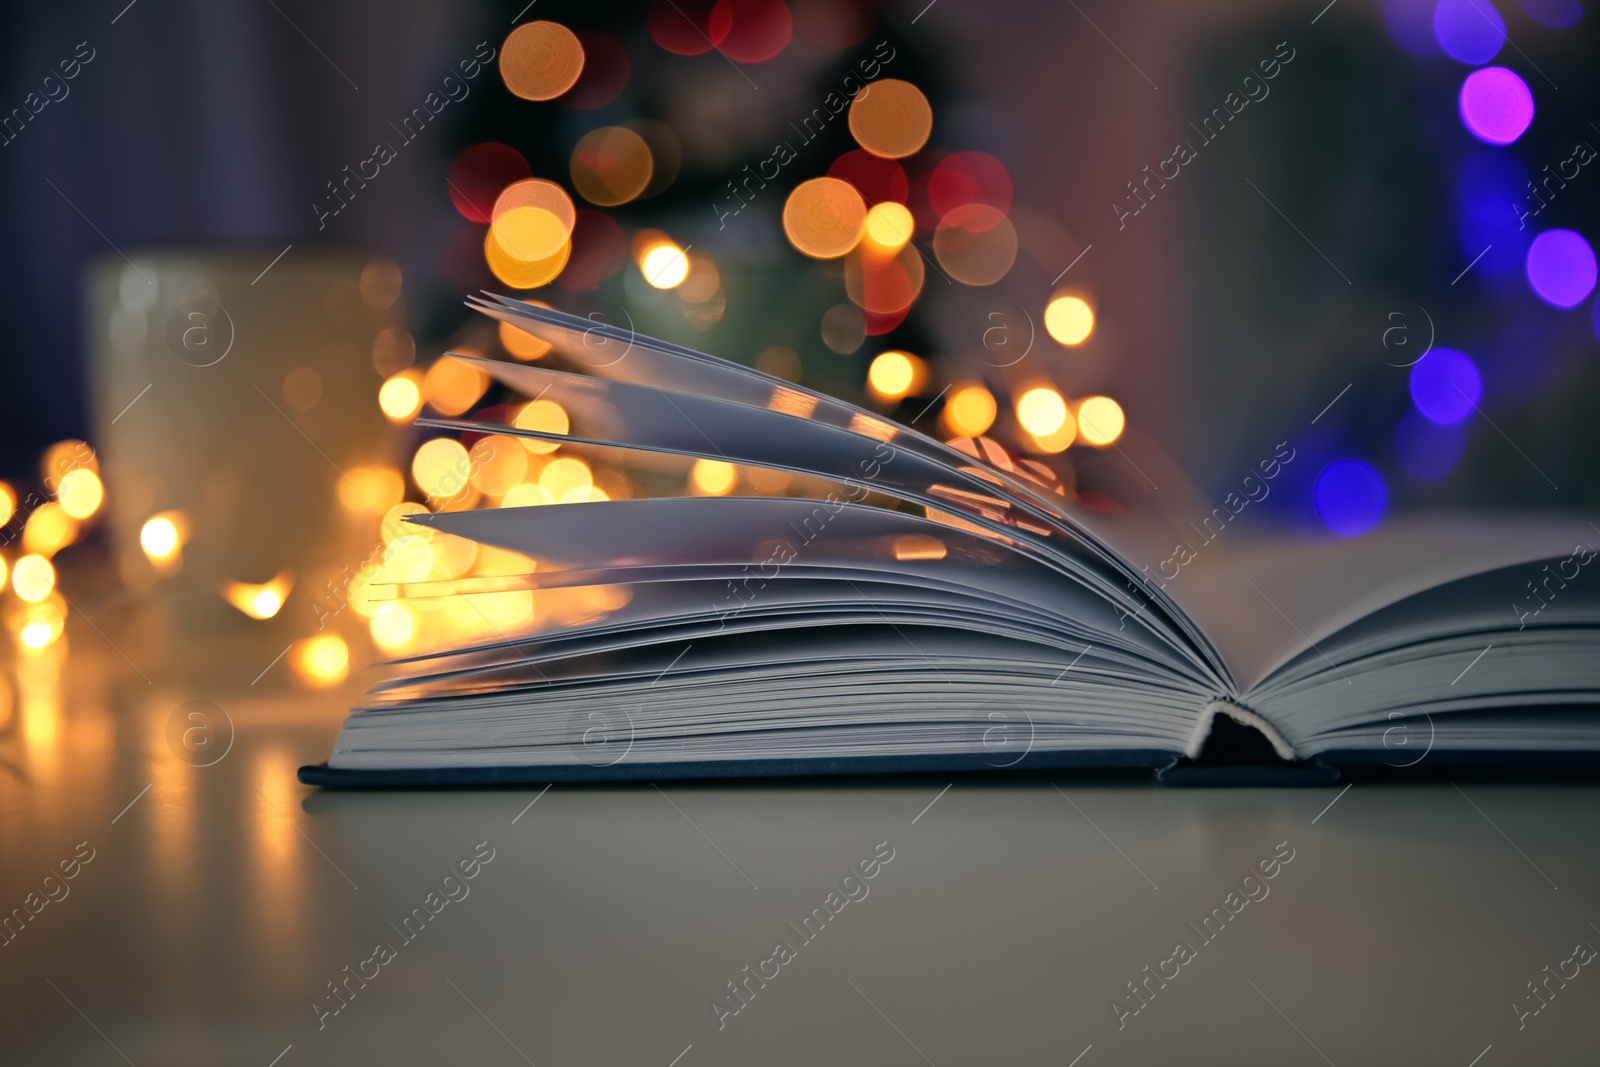 Photo of Open book and blurred Christmas tree on background